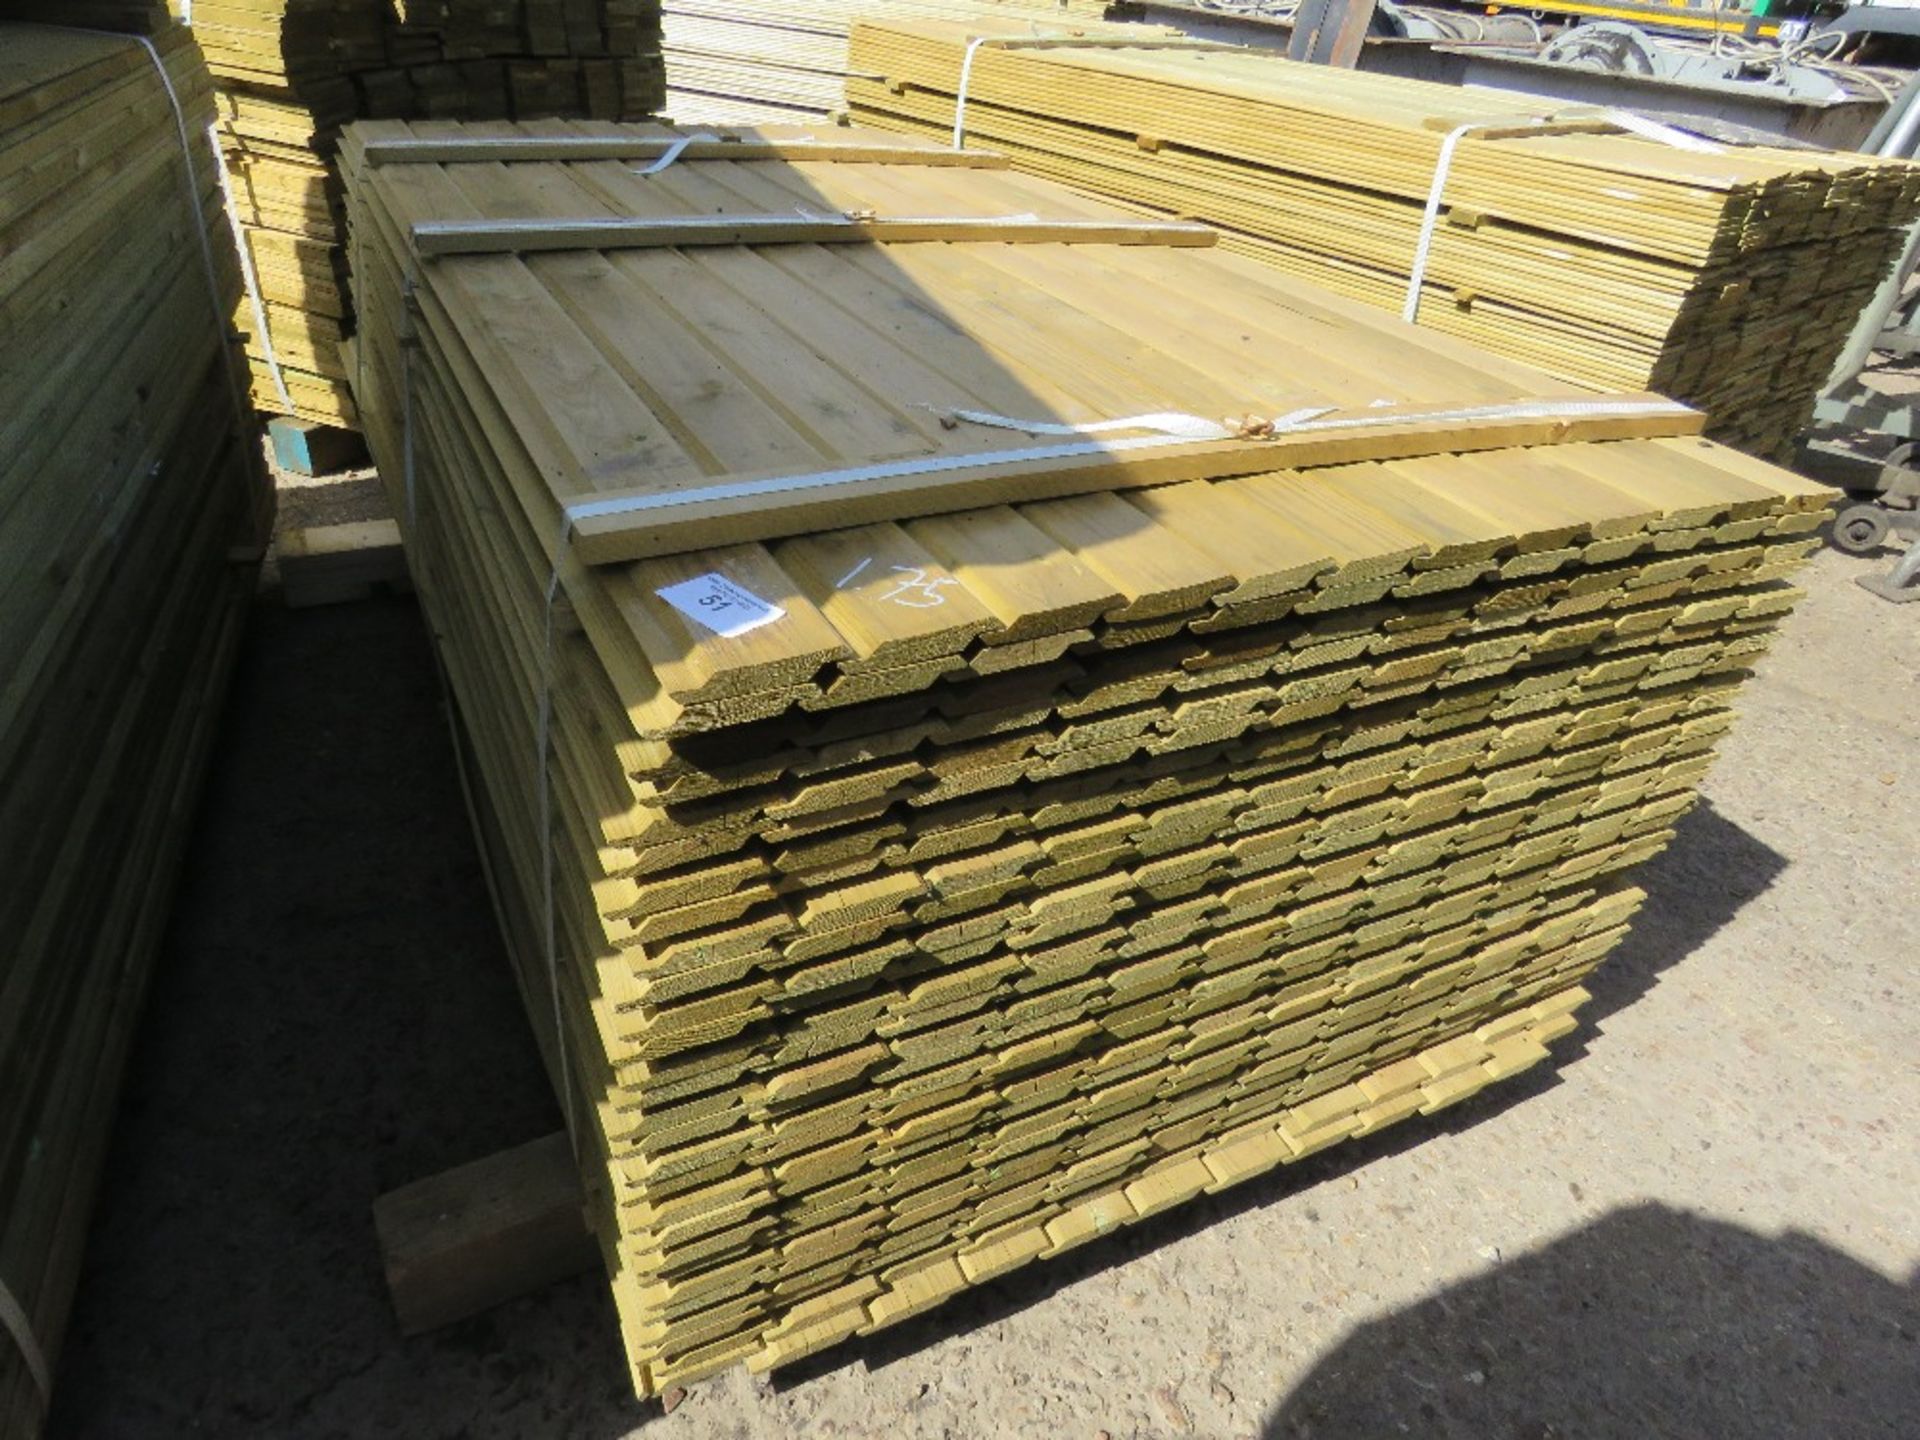 1 X PACK OF SHIPLAP FENCE TIMBER CLADDING @1.74METRE LENGTH X 9CM WIDE